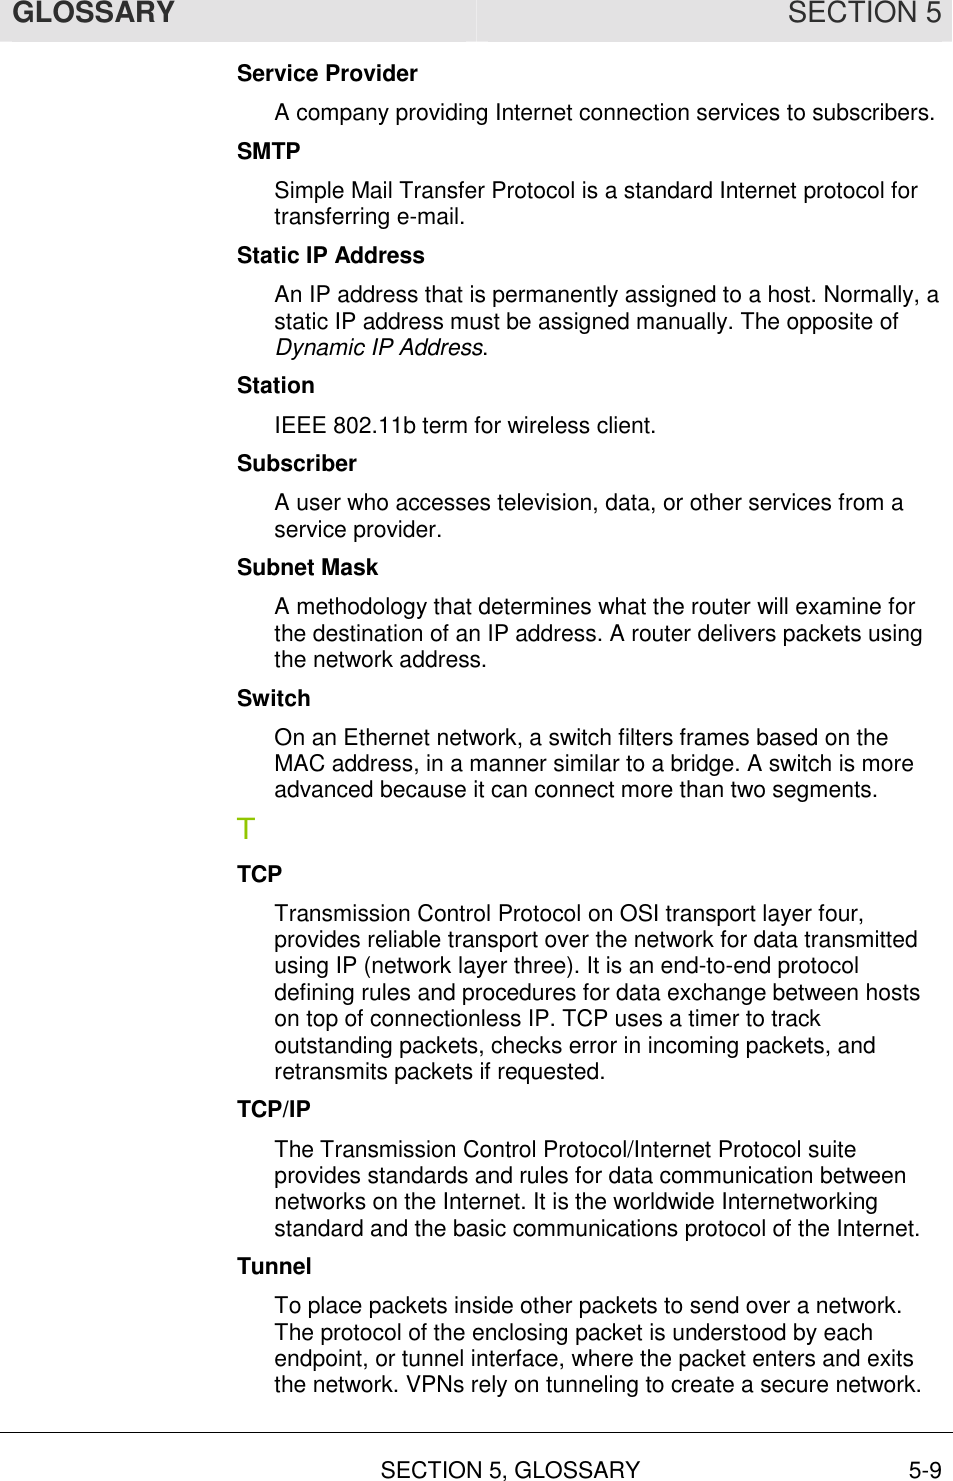 GLOSSARY SECTION 5  SECTION 5, GLOSSARY 5-9 Service Provider A company providing Internet connection services to subscribers. SMTP Simple Mail Transfer Protocol is a standard Internet protocol for transferring e-mail. Static IP Address An IP address that is permanently assigned to a host. Normally, a static IP address must be assigned manually. The opposite of Dynamic IP Address. Station IEEE 802.11b term for wireless client. Subscriber A user who accesses television, data, or other services from a service provider. Subnet Mask A methodology that determines what the router will examine for the destination of an IP address. A router delivers packets using the network address. Switch On an Ethernet network, a switch filters frames based on the MAC address, in a manner similar to a bridge. A switch is more advanced because it can connect more than two segments. T TCP Transmission Control Protocol on OSI transport layer four, provides reliable transport over the network for data transmitted using IP (network layer three). It is an end-to-end protocol defining rules and procedures for data exchange between hosts on top of connectionless IP. TCP uses a timer to track outstanding packets, checks error in incoming packets, and retransmits packets if requested. TCP/IP The Transmission Control Protocol/Internet Protocol suite provides standards and rules for data communication between networks on the Internet. It is the worldwide Internetworking standard and the basic communications protocol of the Internet. Tunnel To place packets inside other packets to send over a network. The protocol of the enclosing packet is understood by each endpoint, or tunnel interface, where the packet enters and exits the network. VPNs rely on tunneling to create a secure network. 